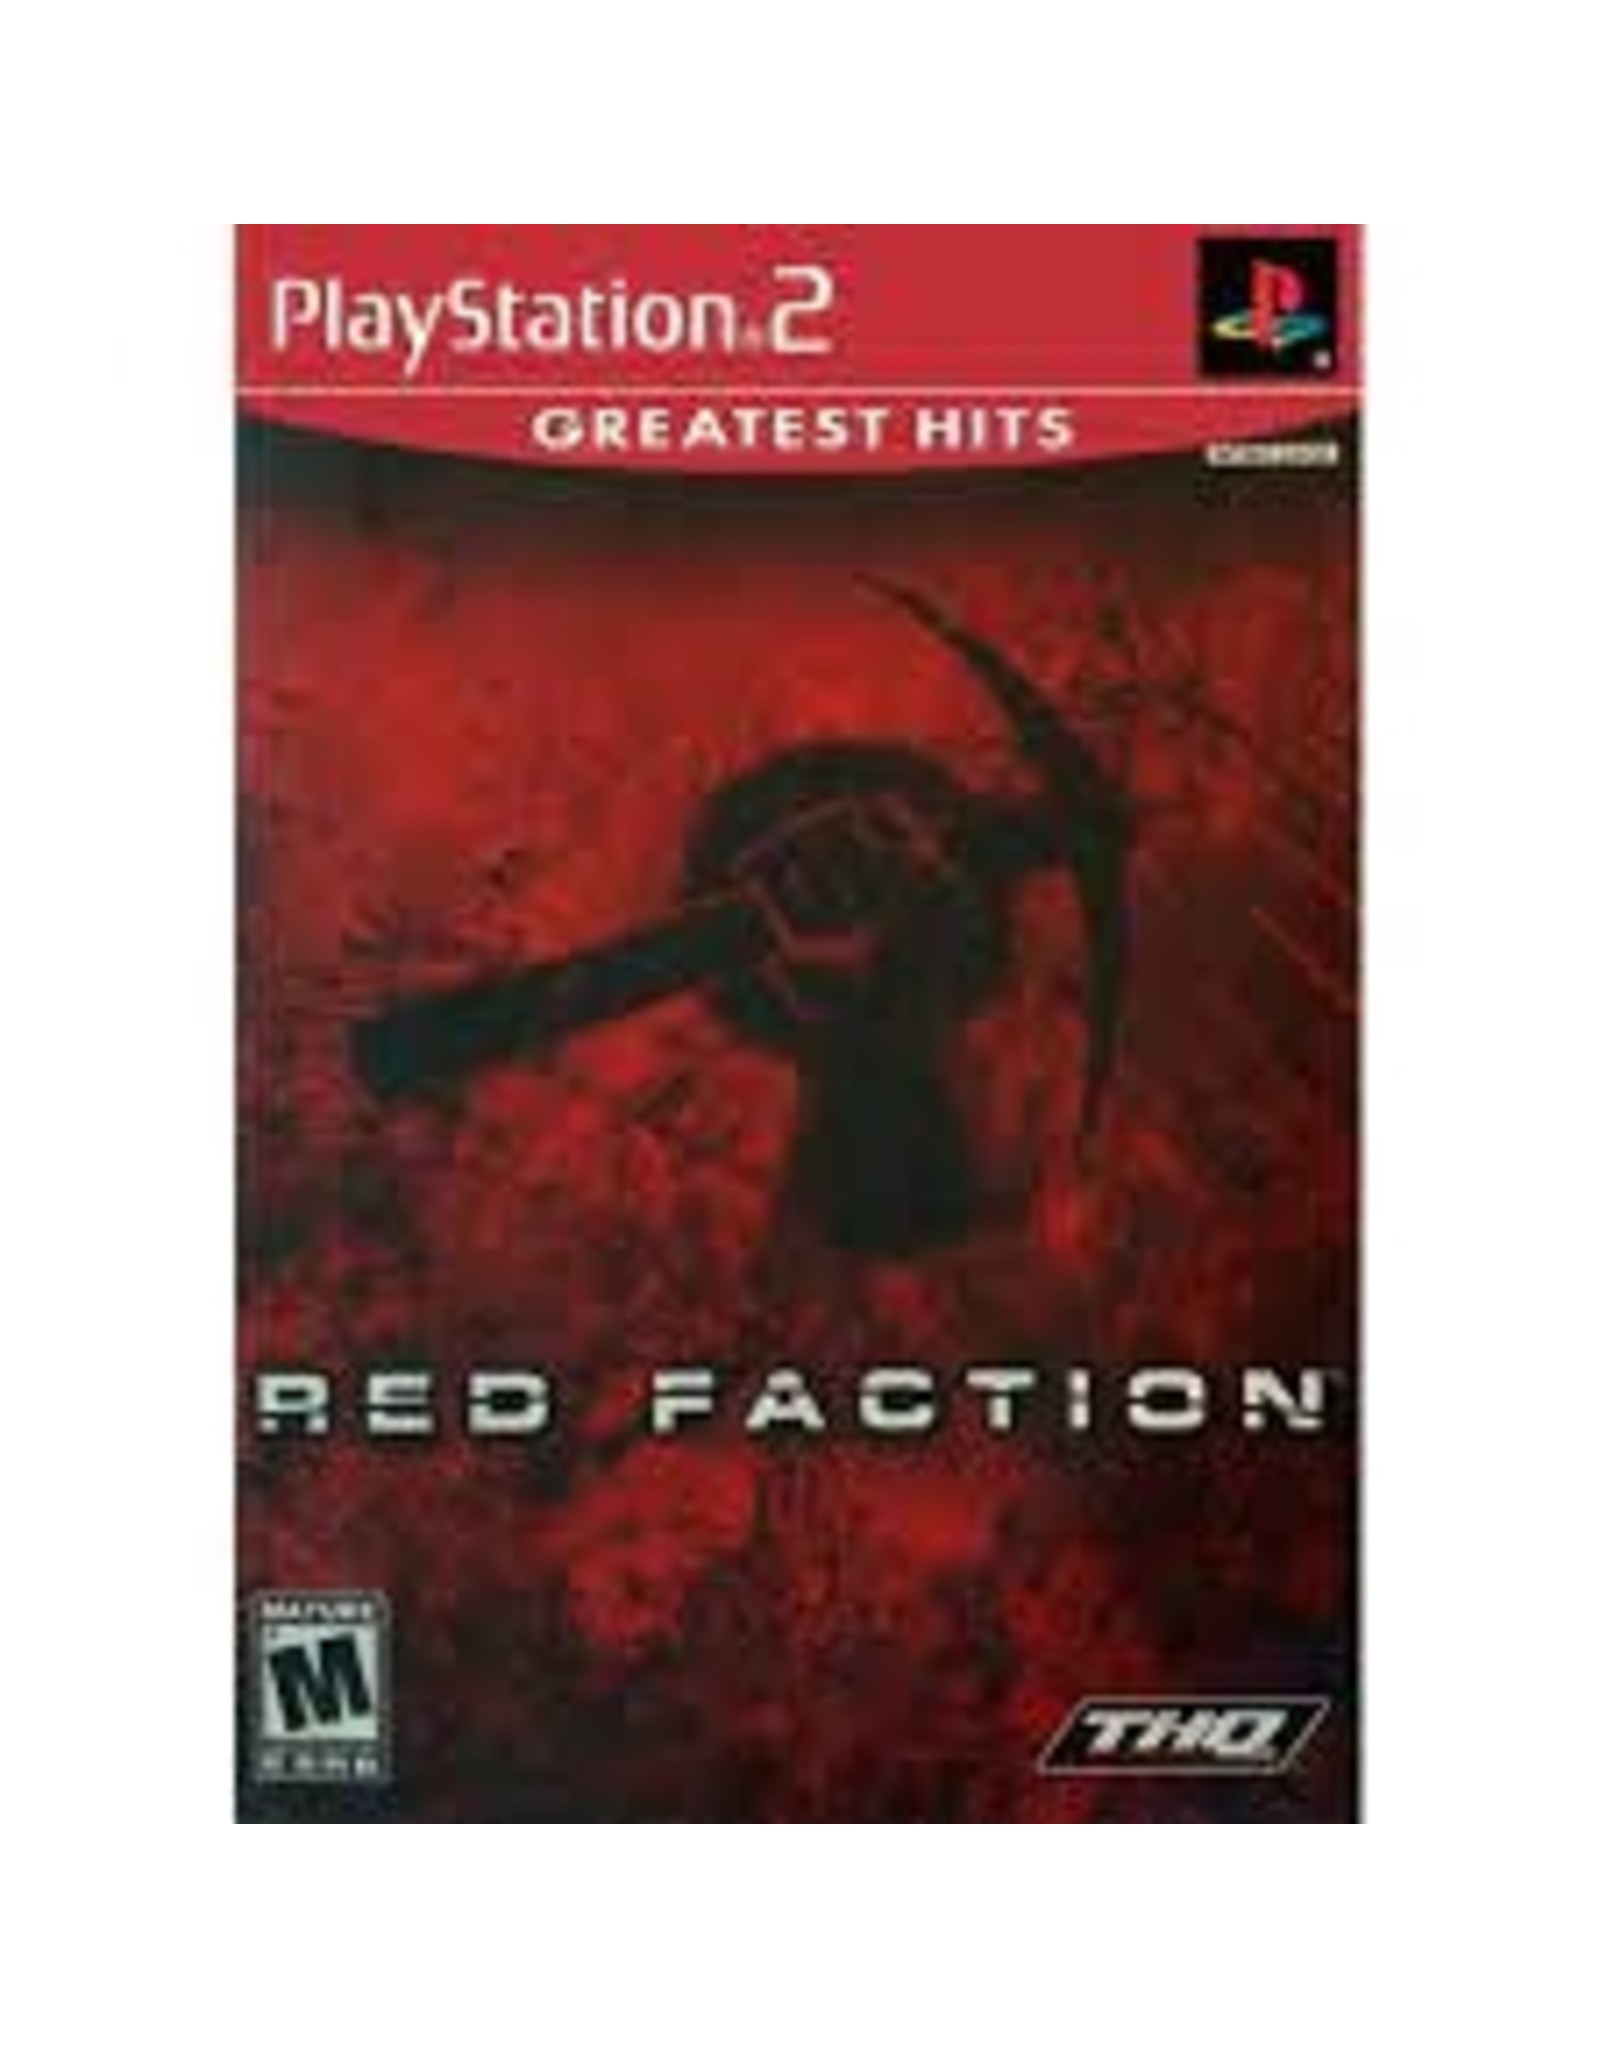 Playstation 2 Red Faction (Greatest Hits, CiB)